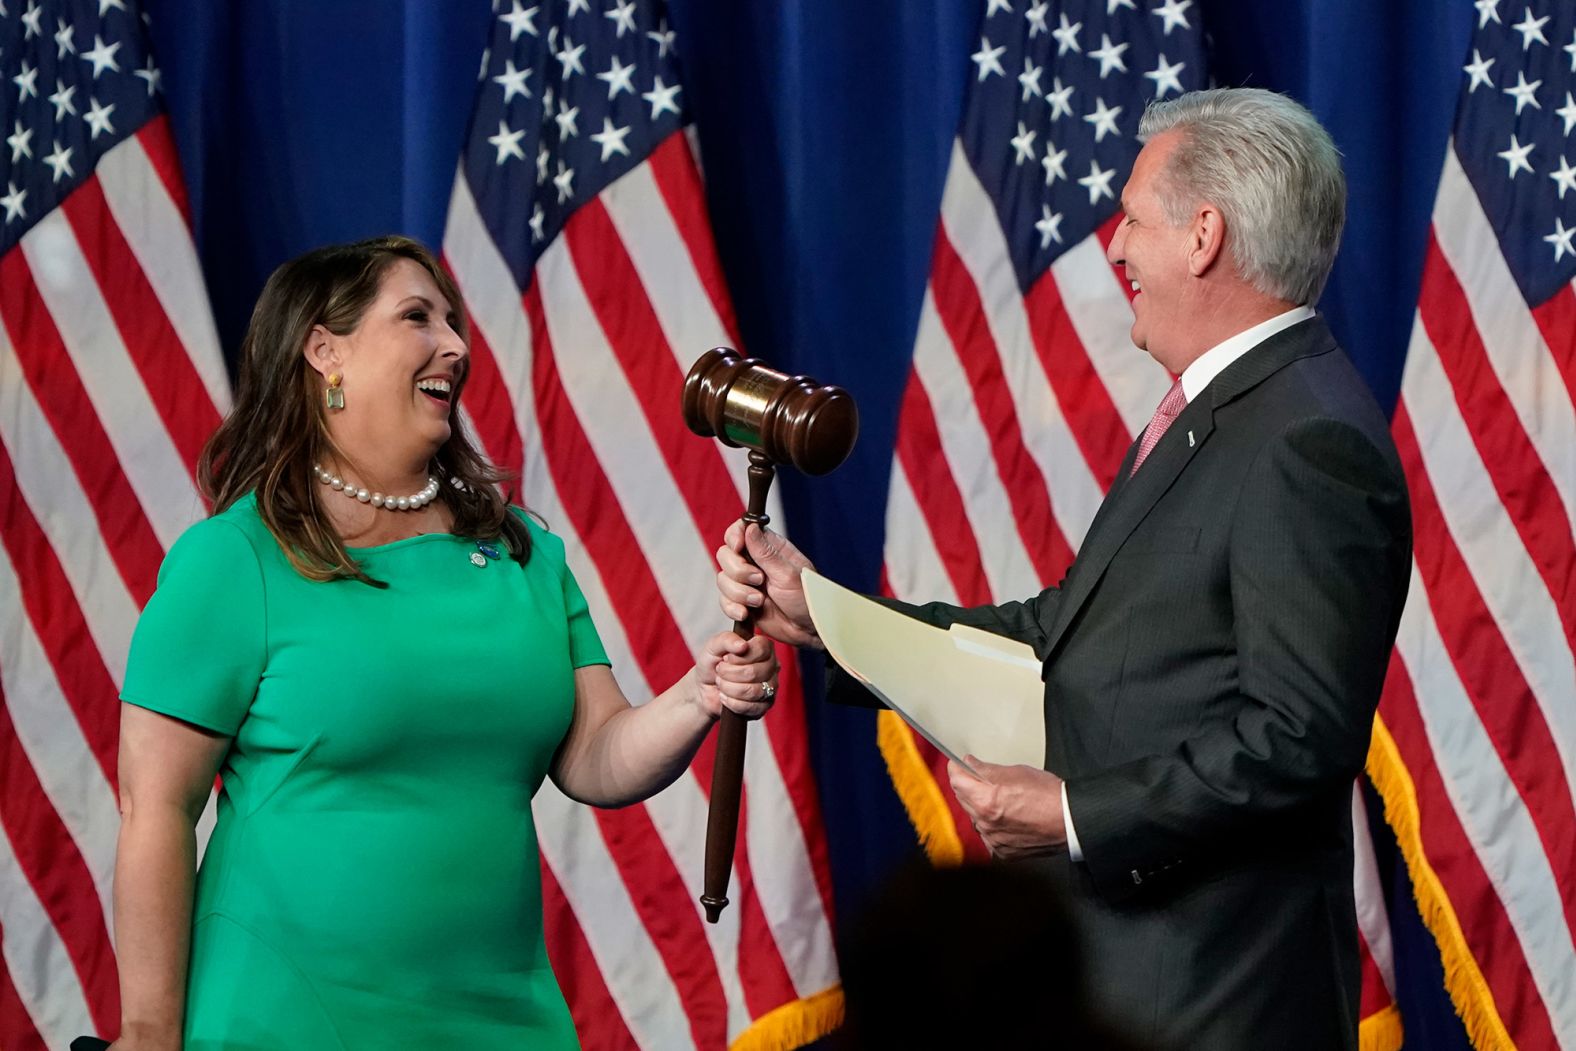 Ronna McDaniel, the chairwoman of the Republican National Committee, hands the gavel to House Minority Leader Kevin McCarthy before he spoke in Charlotte on Monday.